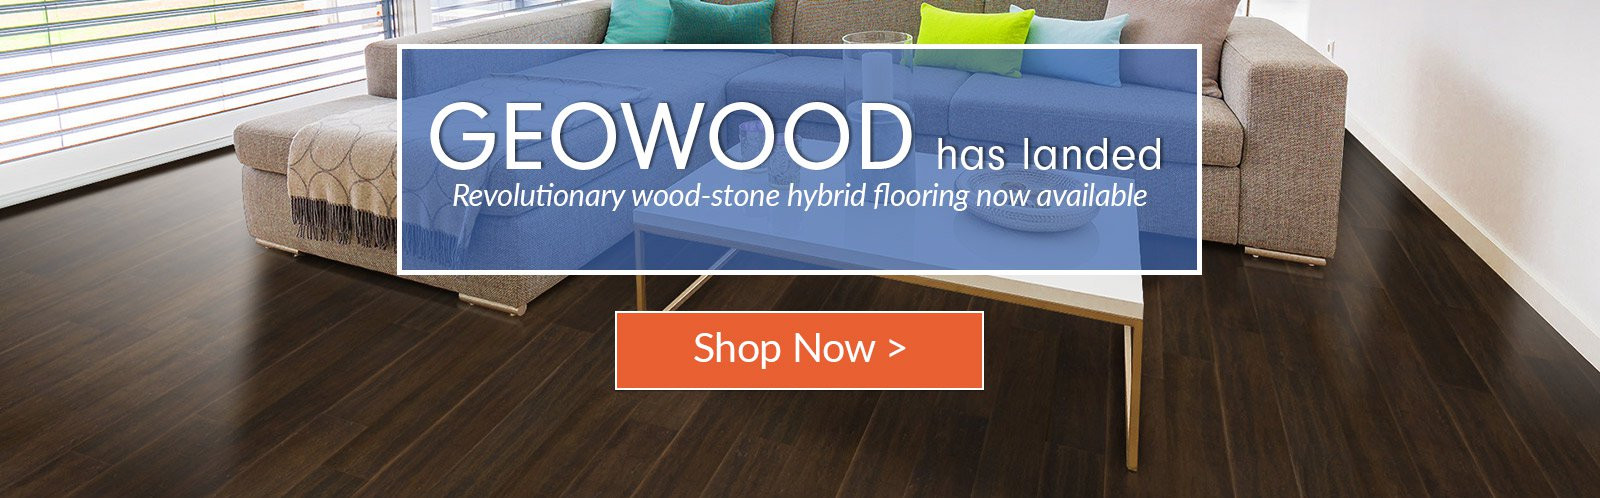 10 Trendy Hardwood Flooring Los Angeles Ca 2024 free download hardwood flooring los angeles ca of green building construction materials and home decor cali bamboo with regard to geowood launch homepage slider